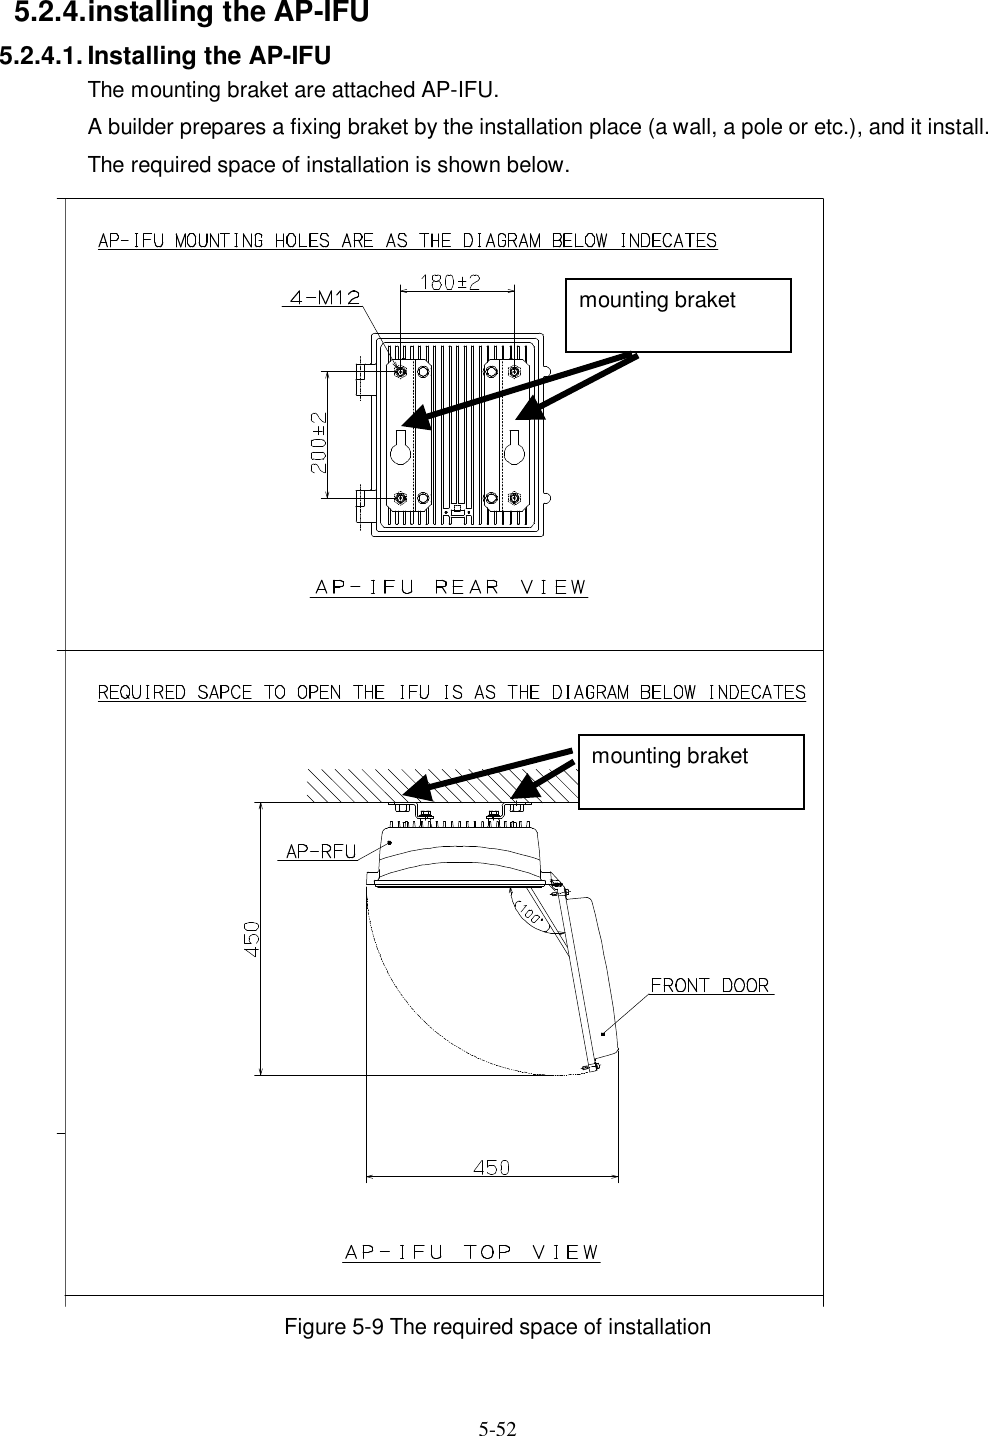   5-52   5.2.4. installing the AP-IFU 5.2.4.1. Installing the AP-IFU The mounting braket are attached AP-IFU. A builder prepares a fixing braket by the installation place (a wall, a pole or etc.), and it install.   The required space of installation is shown below.                               Figure 5-9 The required space of installation  mounting braket mounting braket 